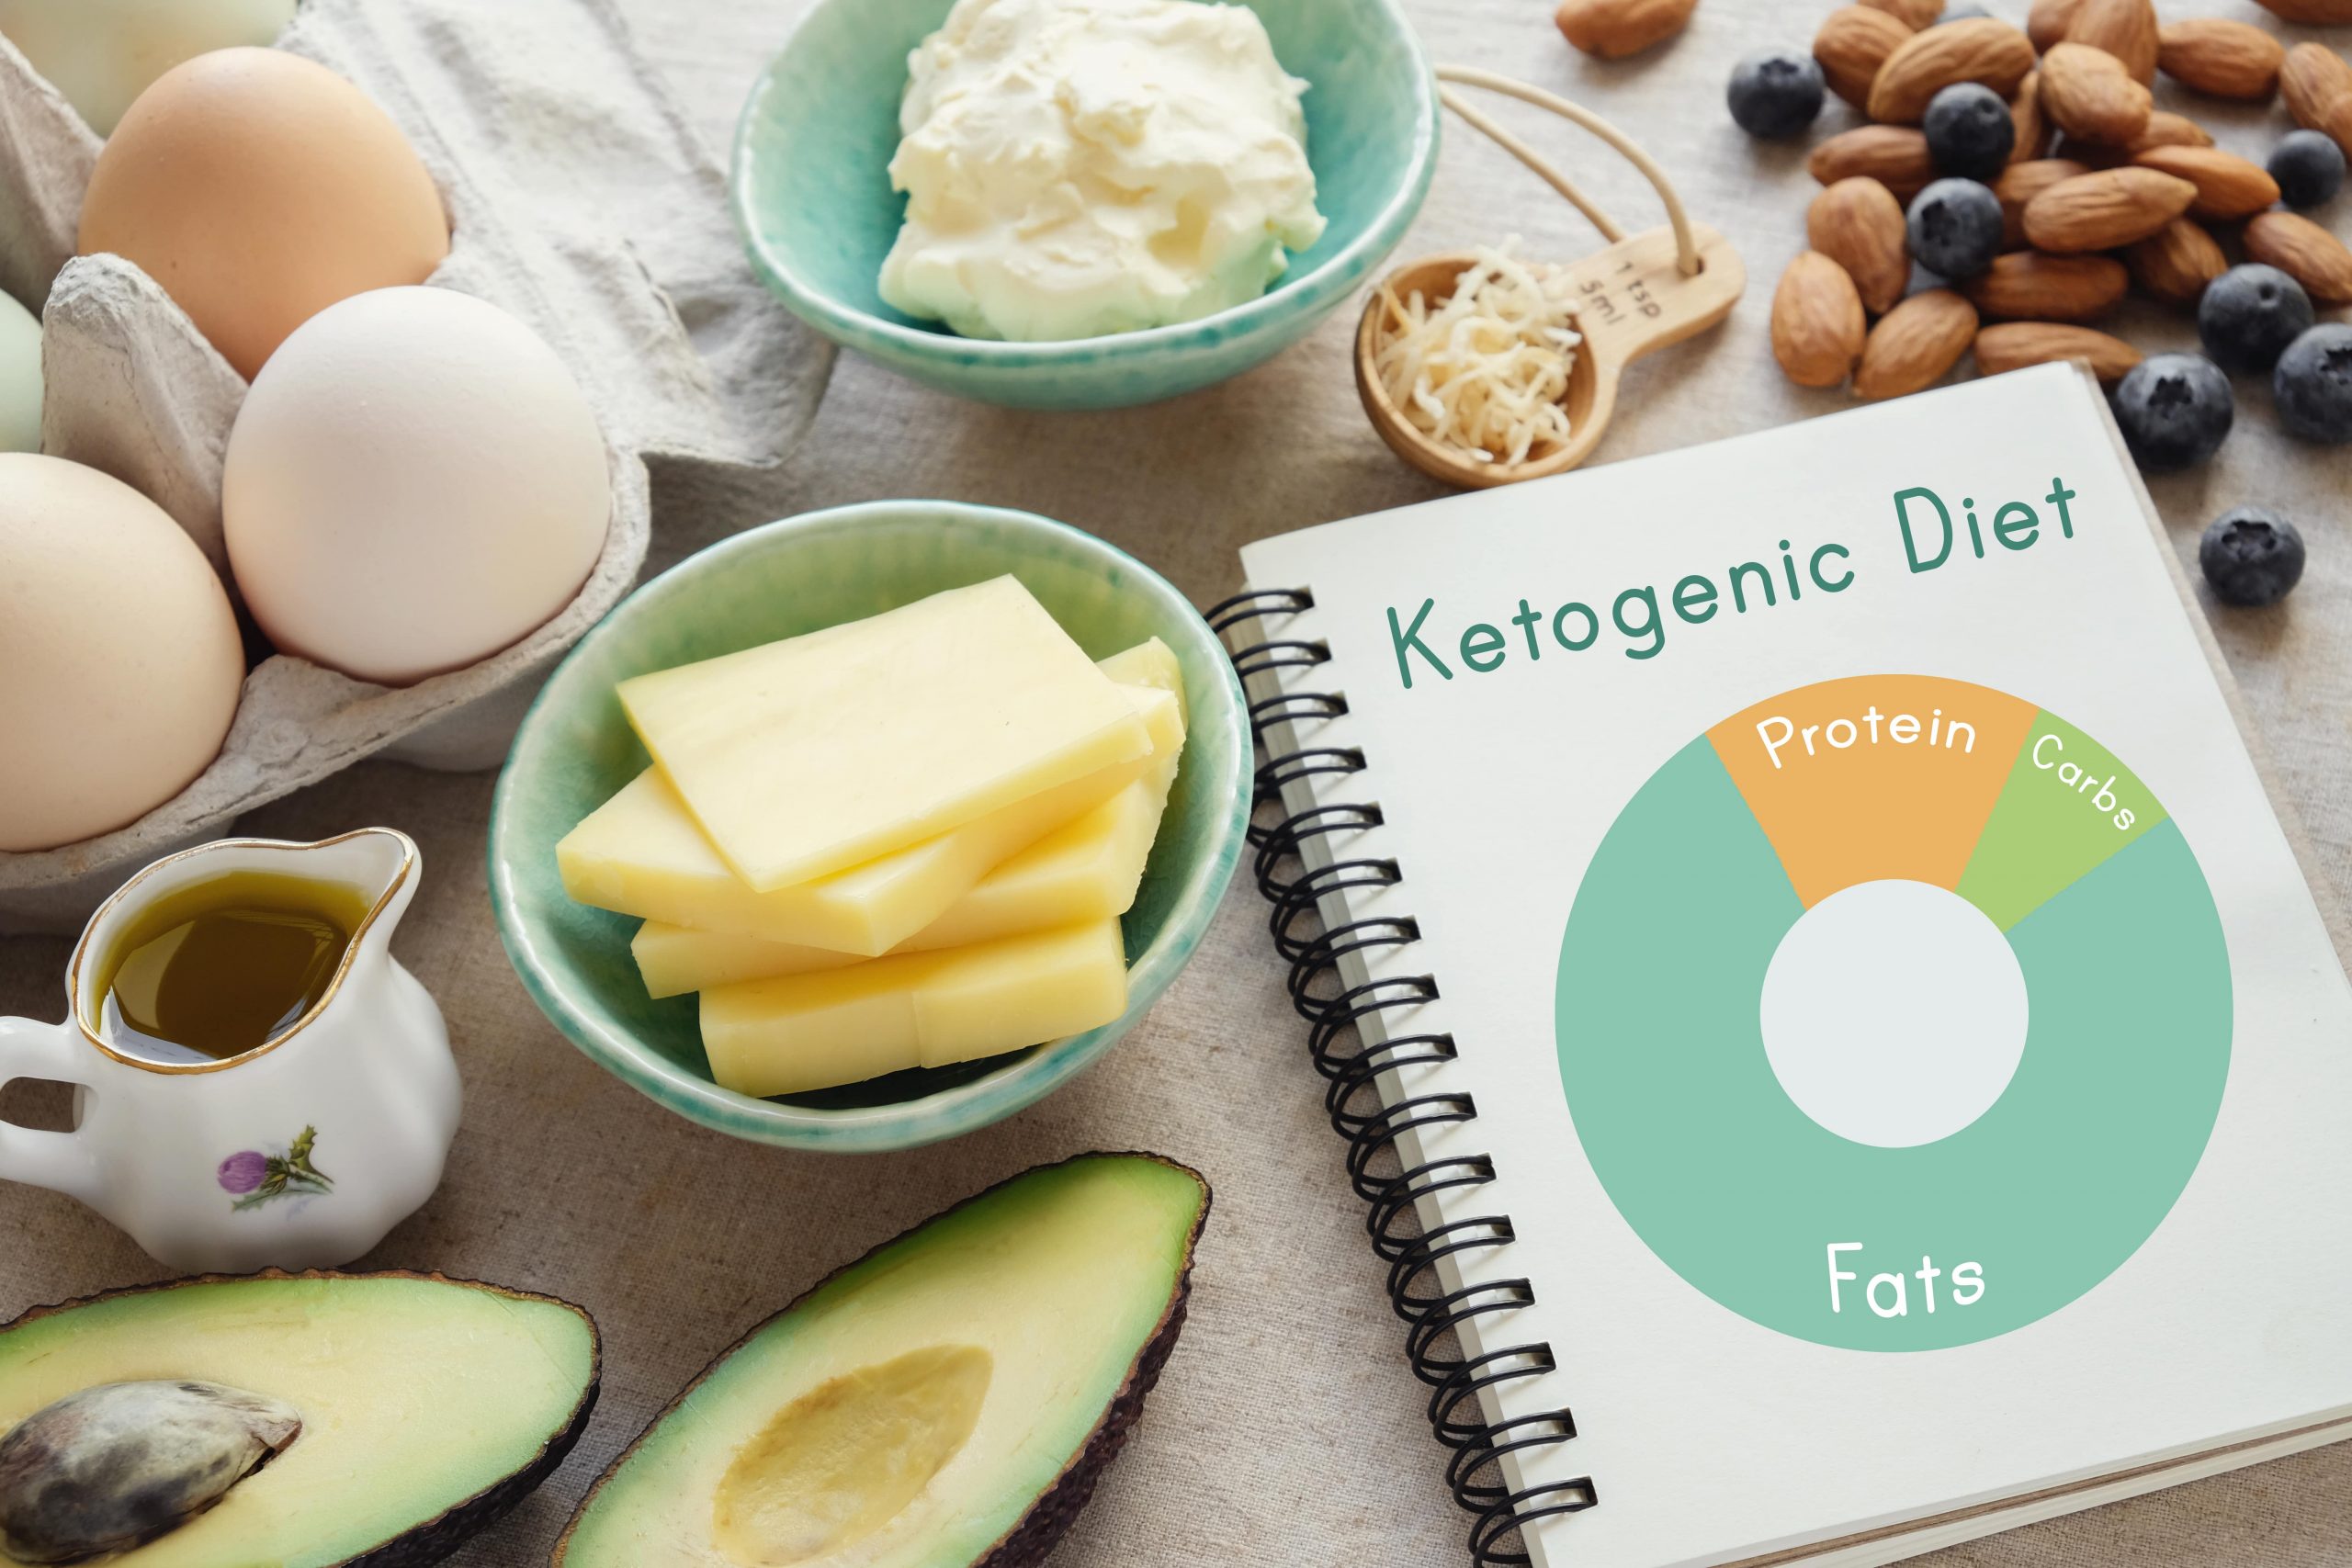 WHAT ARE THE RISKS ATTACHED TO KETO DIET